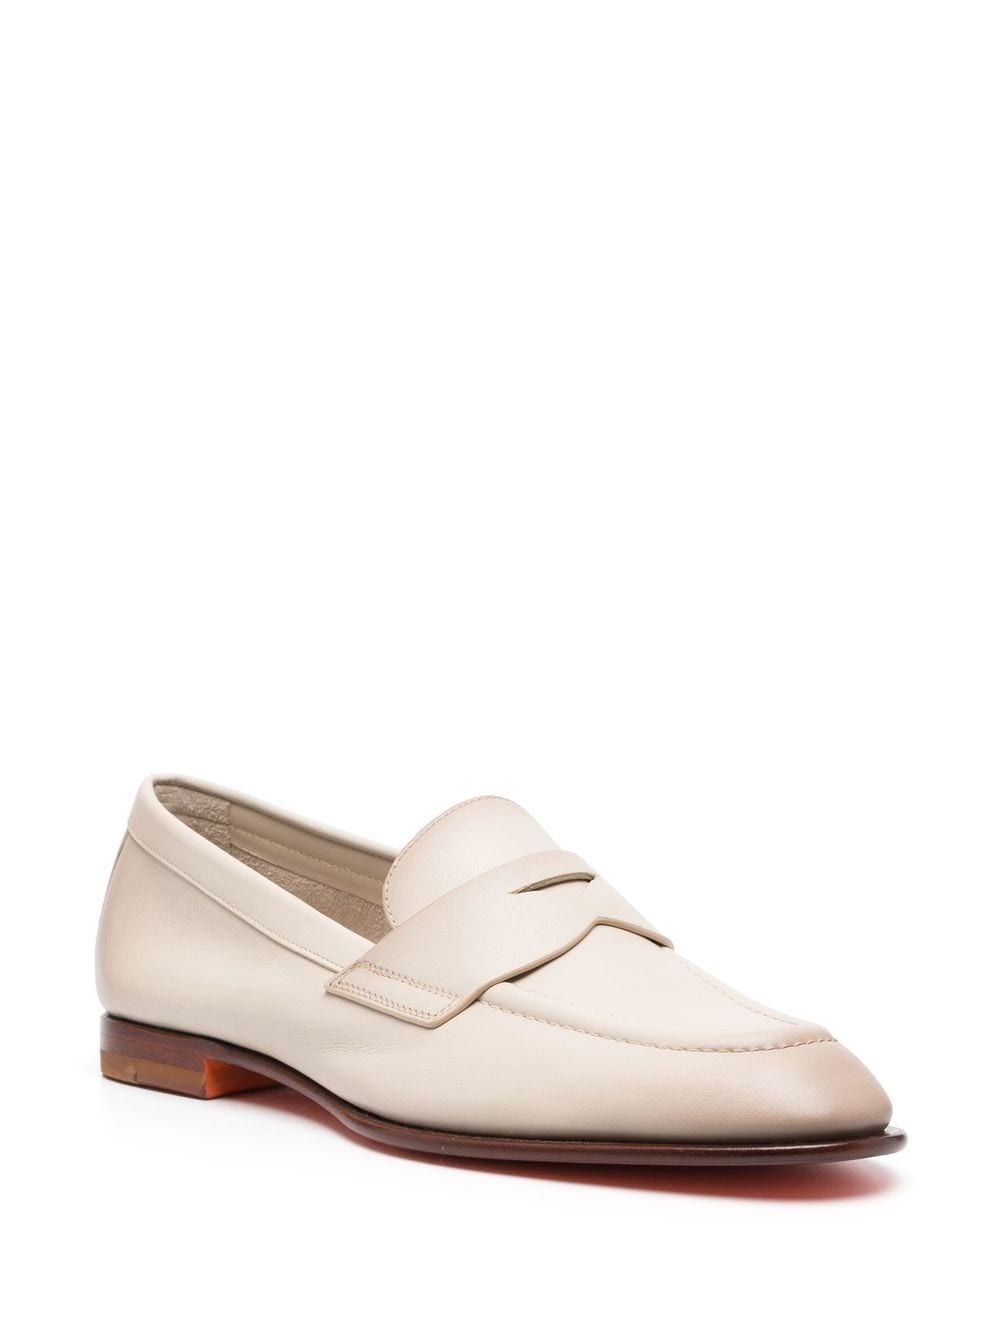 leather penny loafers - 2